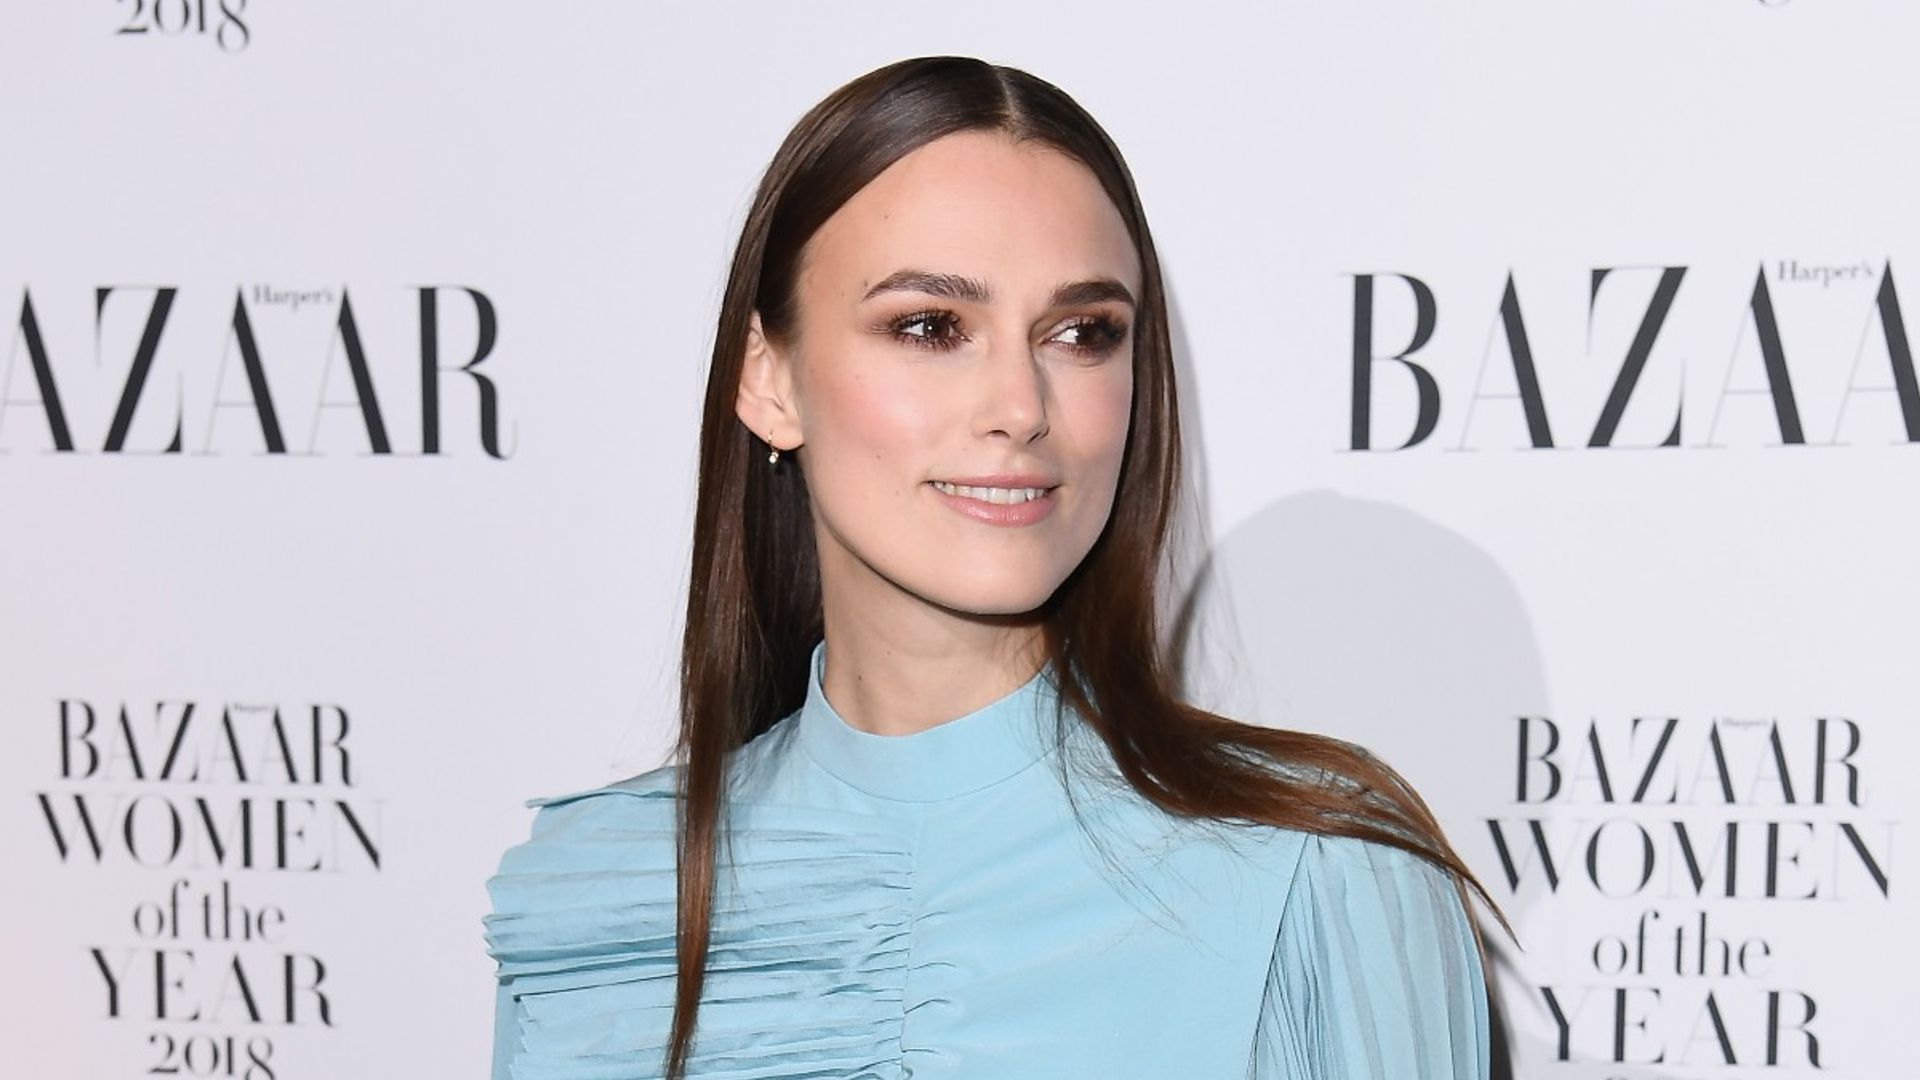 The Real Reason Keira Knightley Dropped Out Of The Essex Serpent Hello